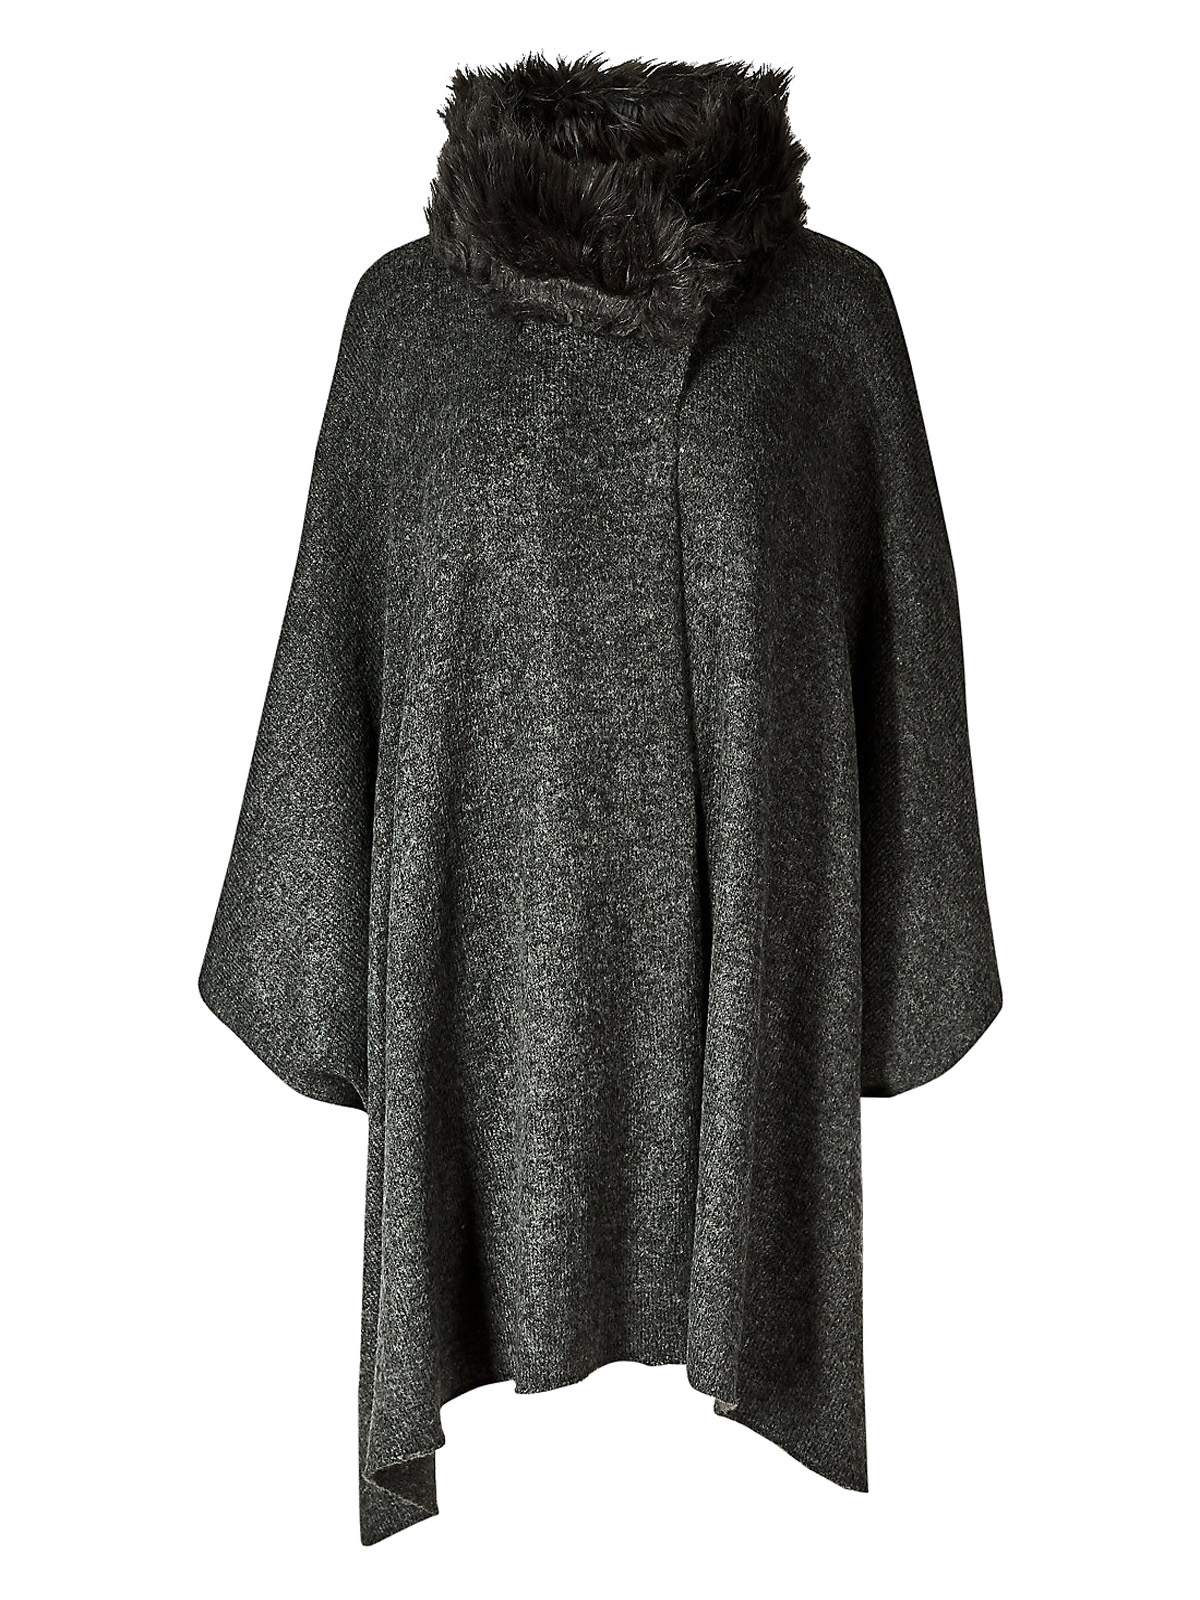 Marks and Spencer - - M&5 CHARCOAL Stylish Faux Fur Collar Knitted ...